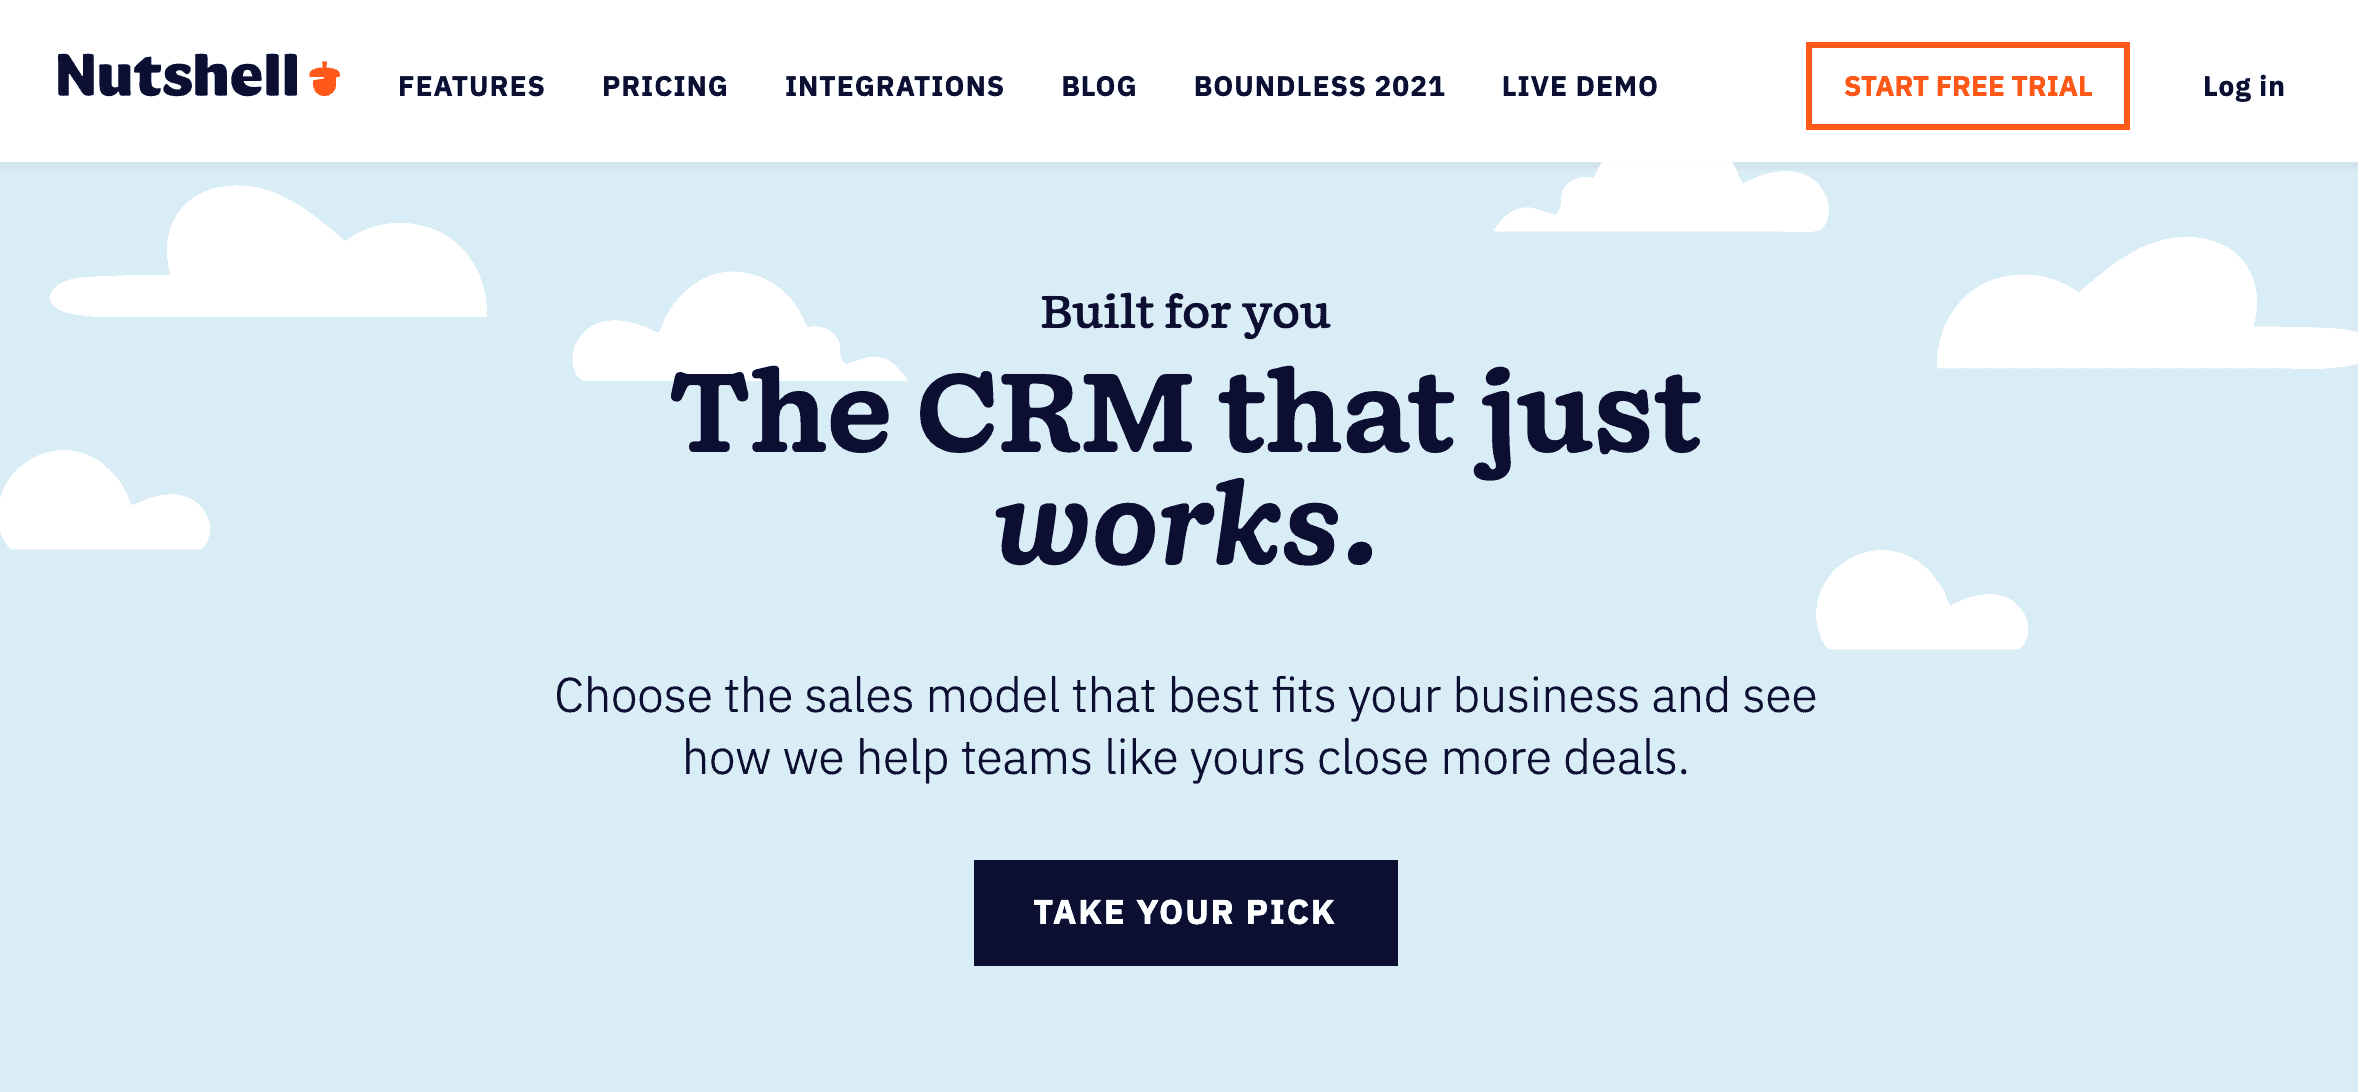 Nutshell CRM software for small businesses